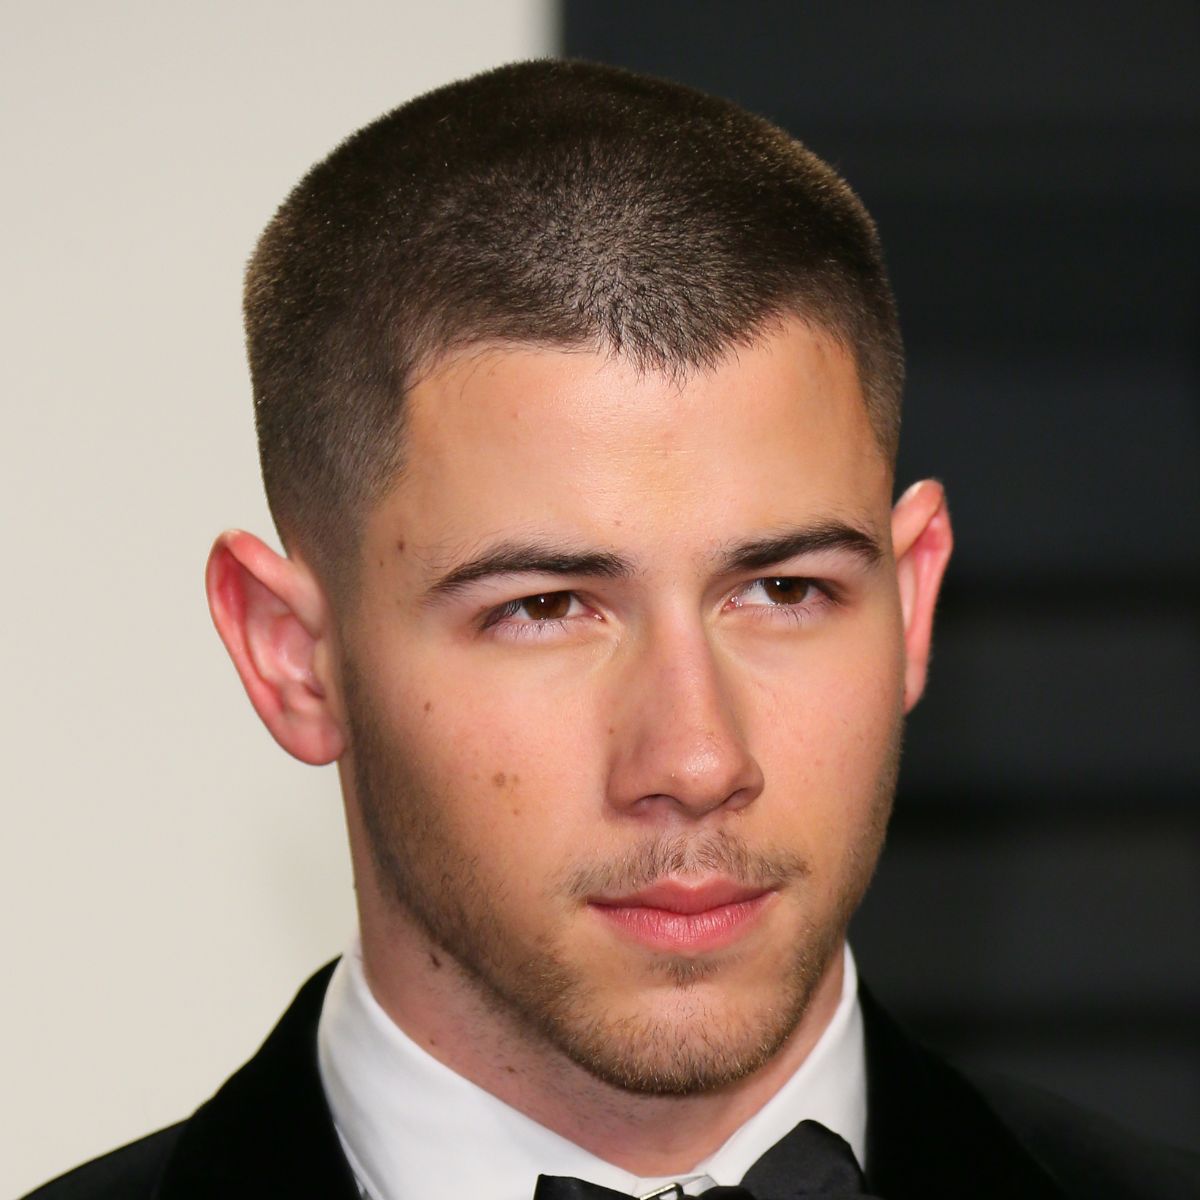 nick-jonas-7-buzz-cut-hairstyles-to-try-in-2020-man-for-himself-ft.jpg